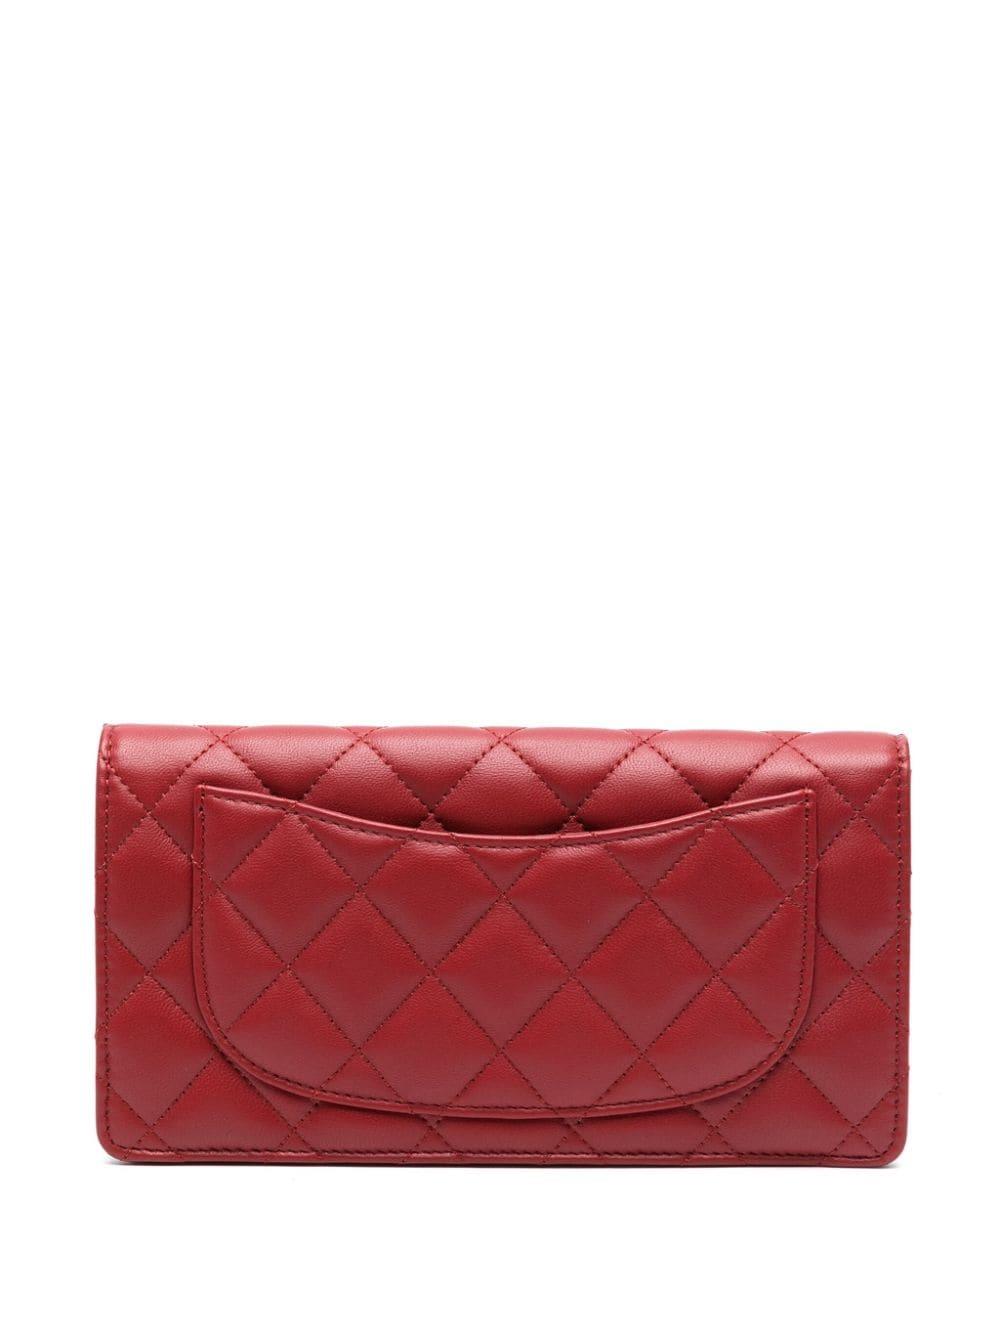 CHANEL Pre-Owned 2012-2013 diamond-quilted wallet - Red